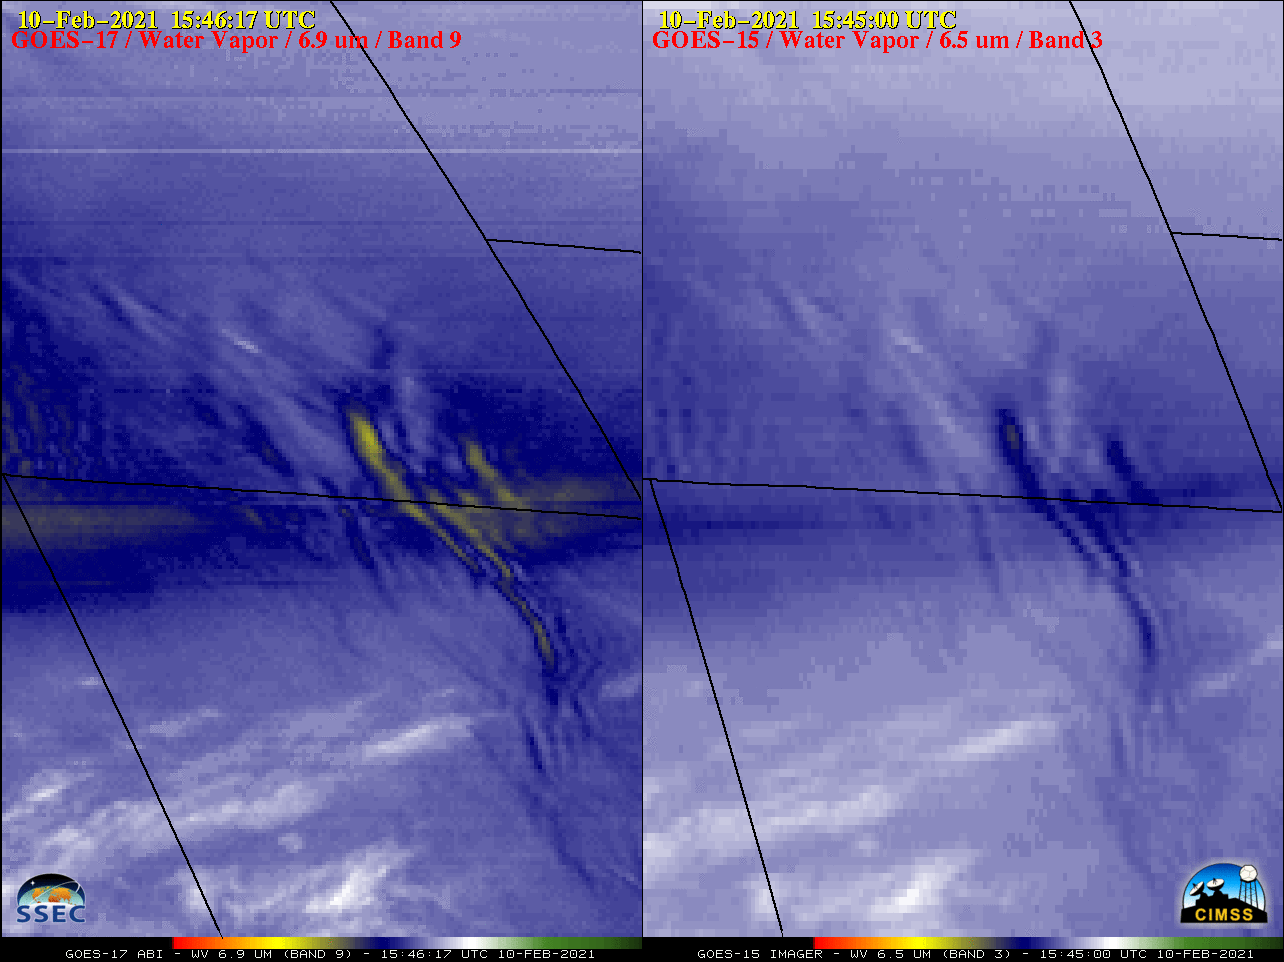 Water Vapor images from GOES-17 (6.9 µm, left) and GOES-15 (6.5 µm, right) [click to play animation | MP4]